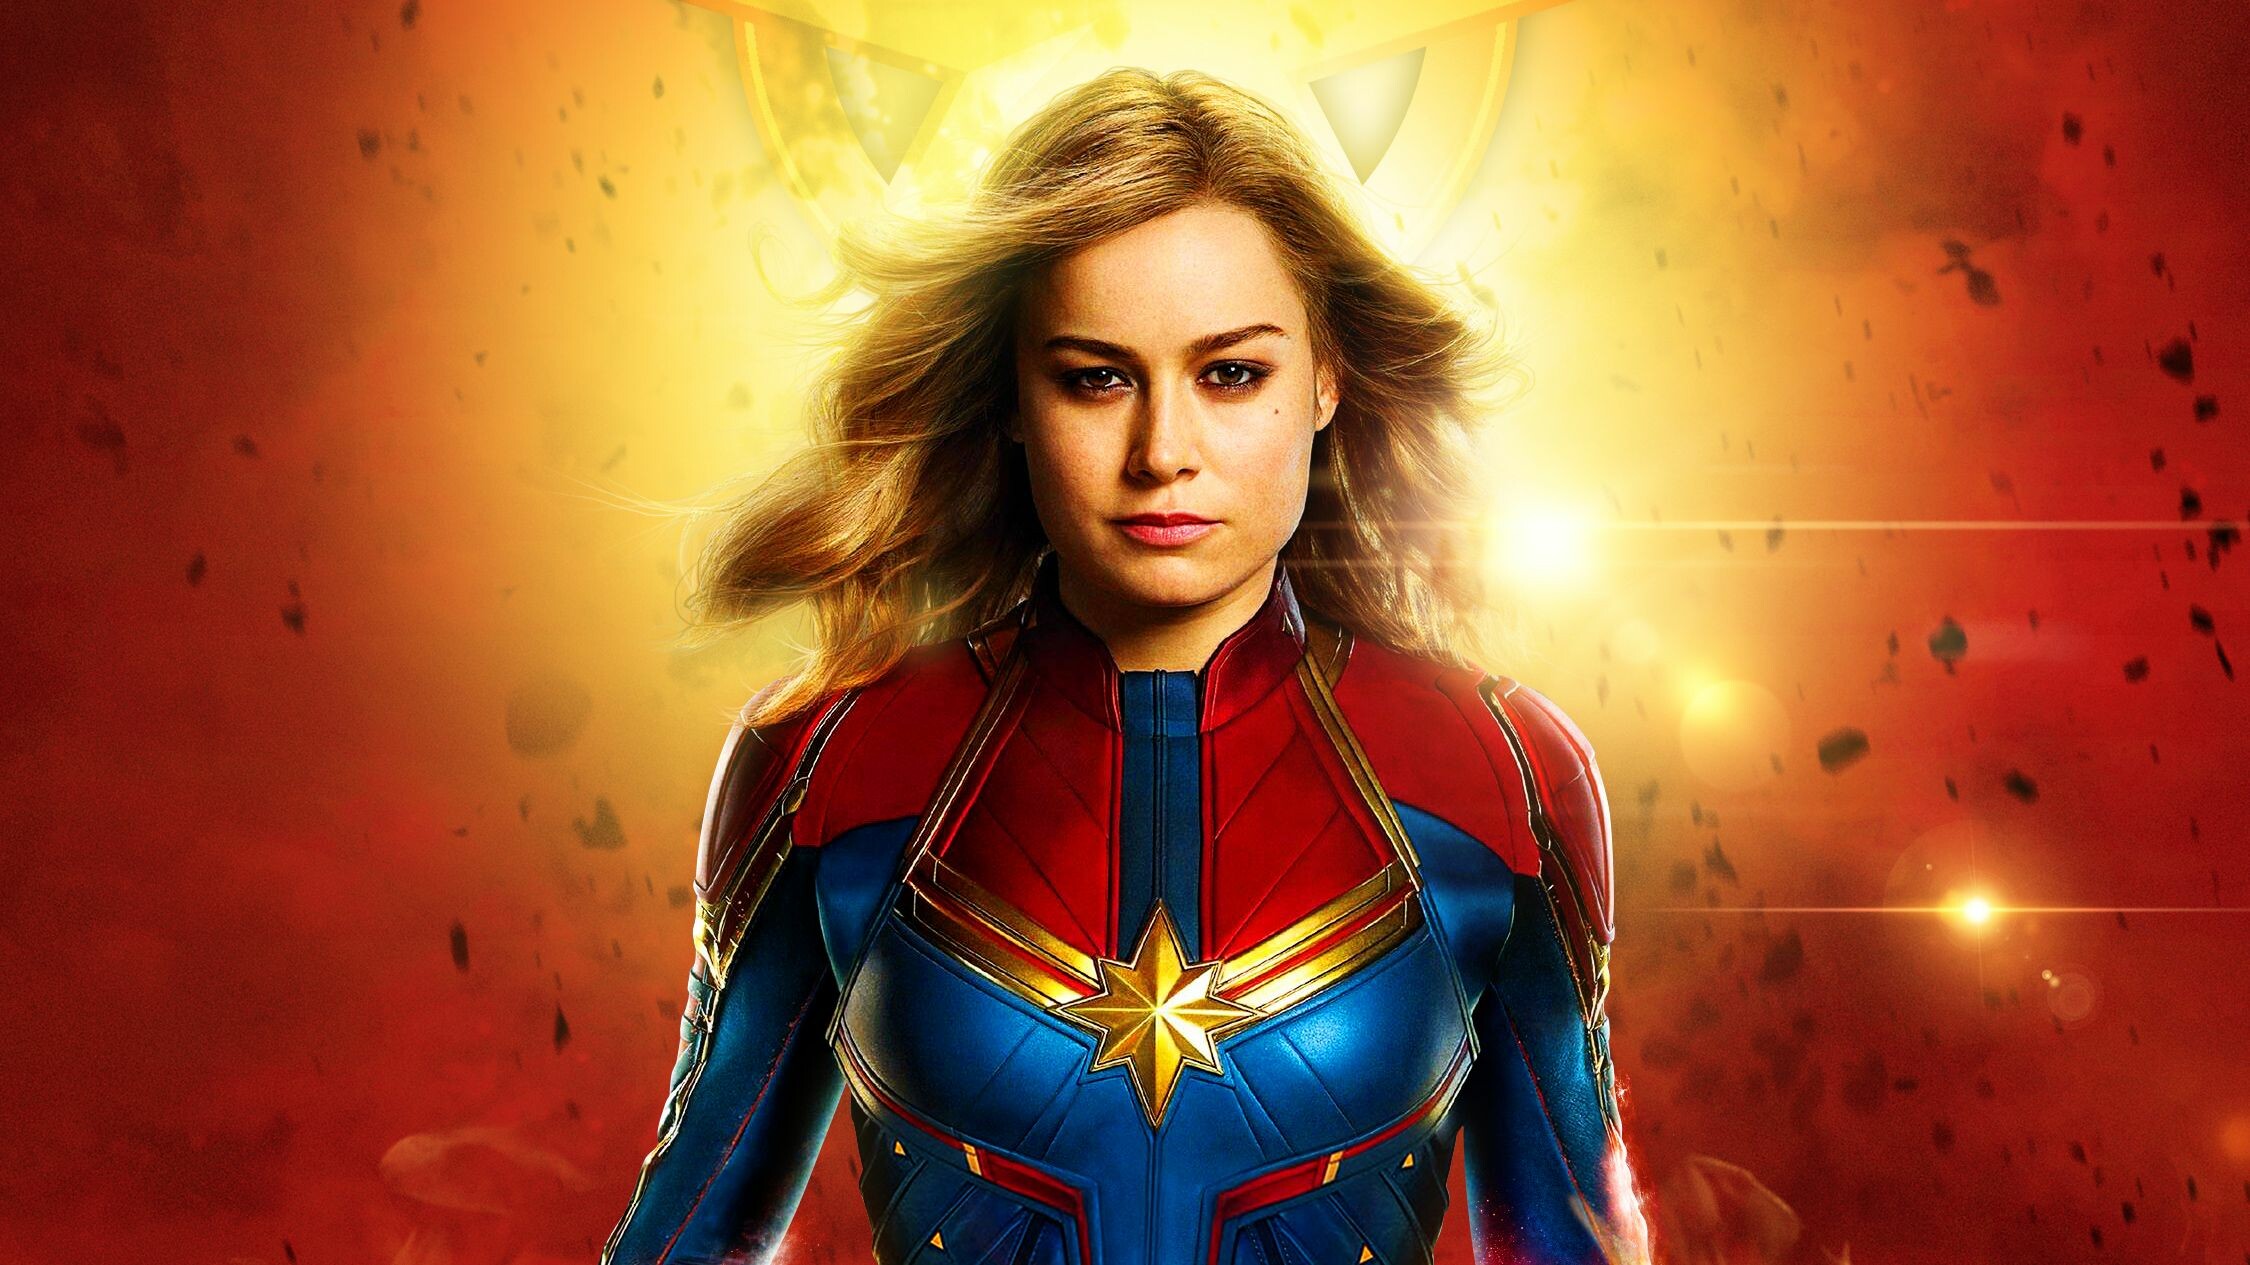 Marvel Girls: Brie Larson as Carol Danvers / Vers, imbued with superhuman strength and flight after exposure to Tesseract energy. 2250x1270 HD Wallpaper.